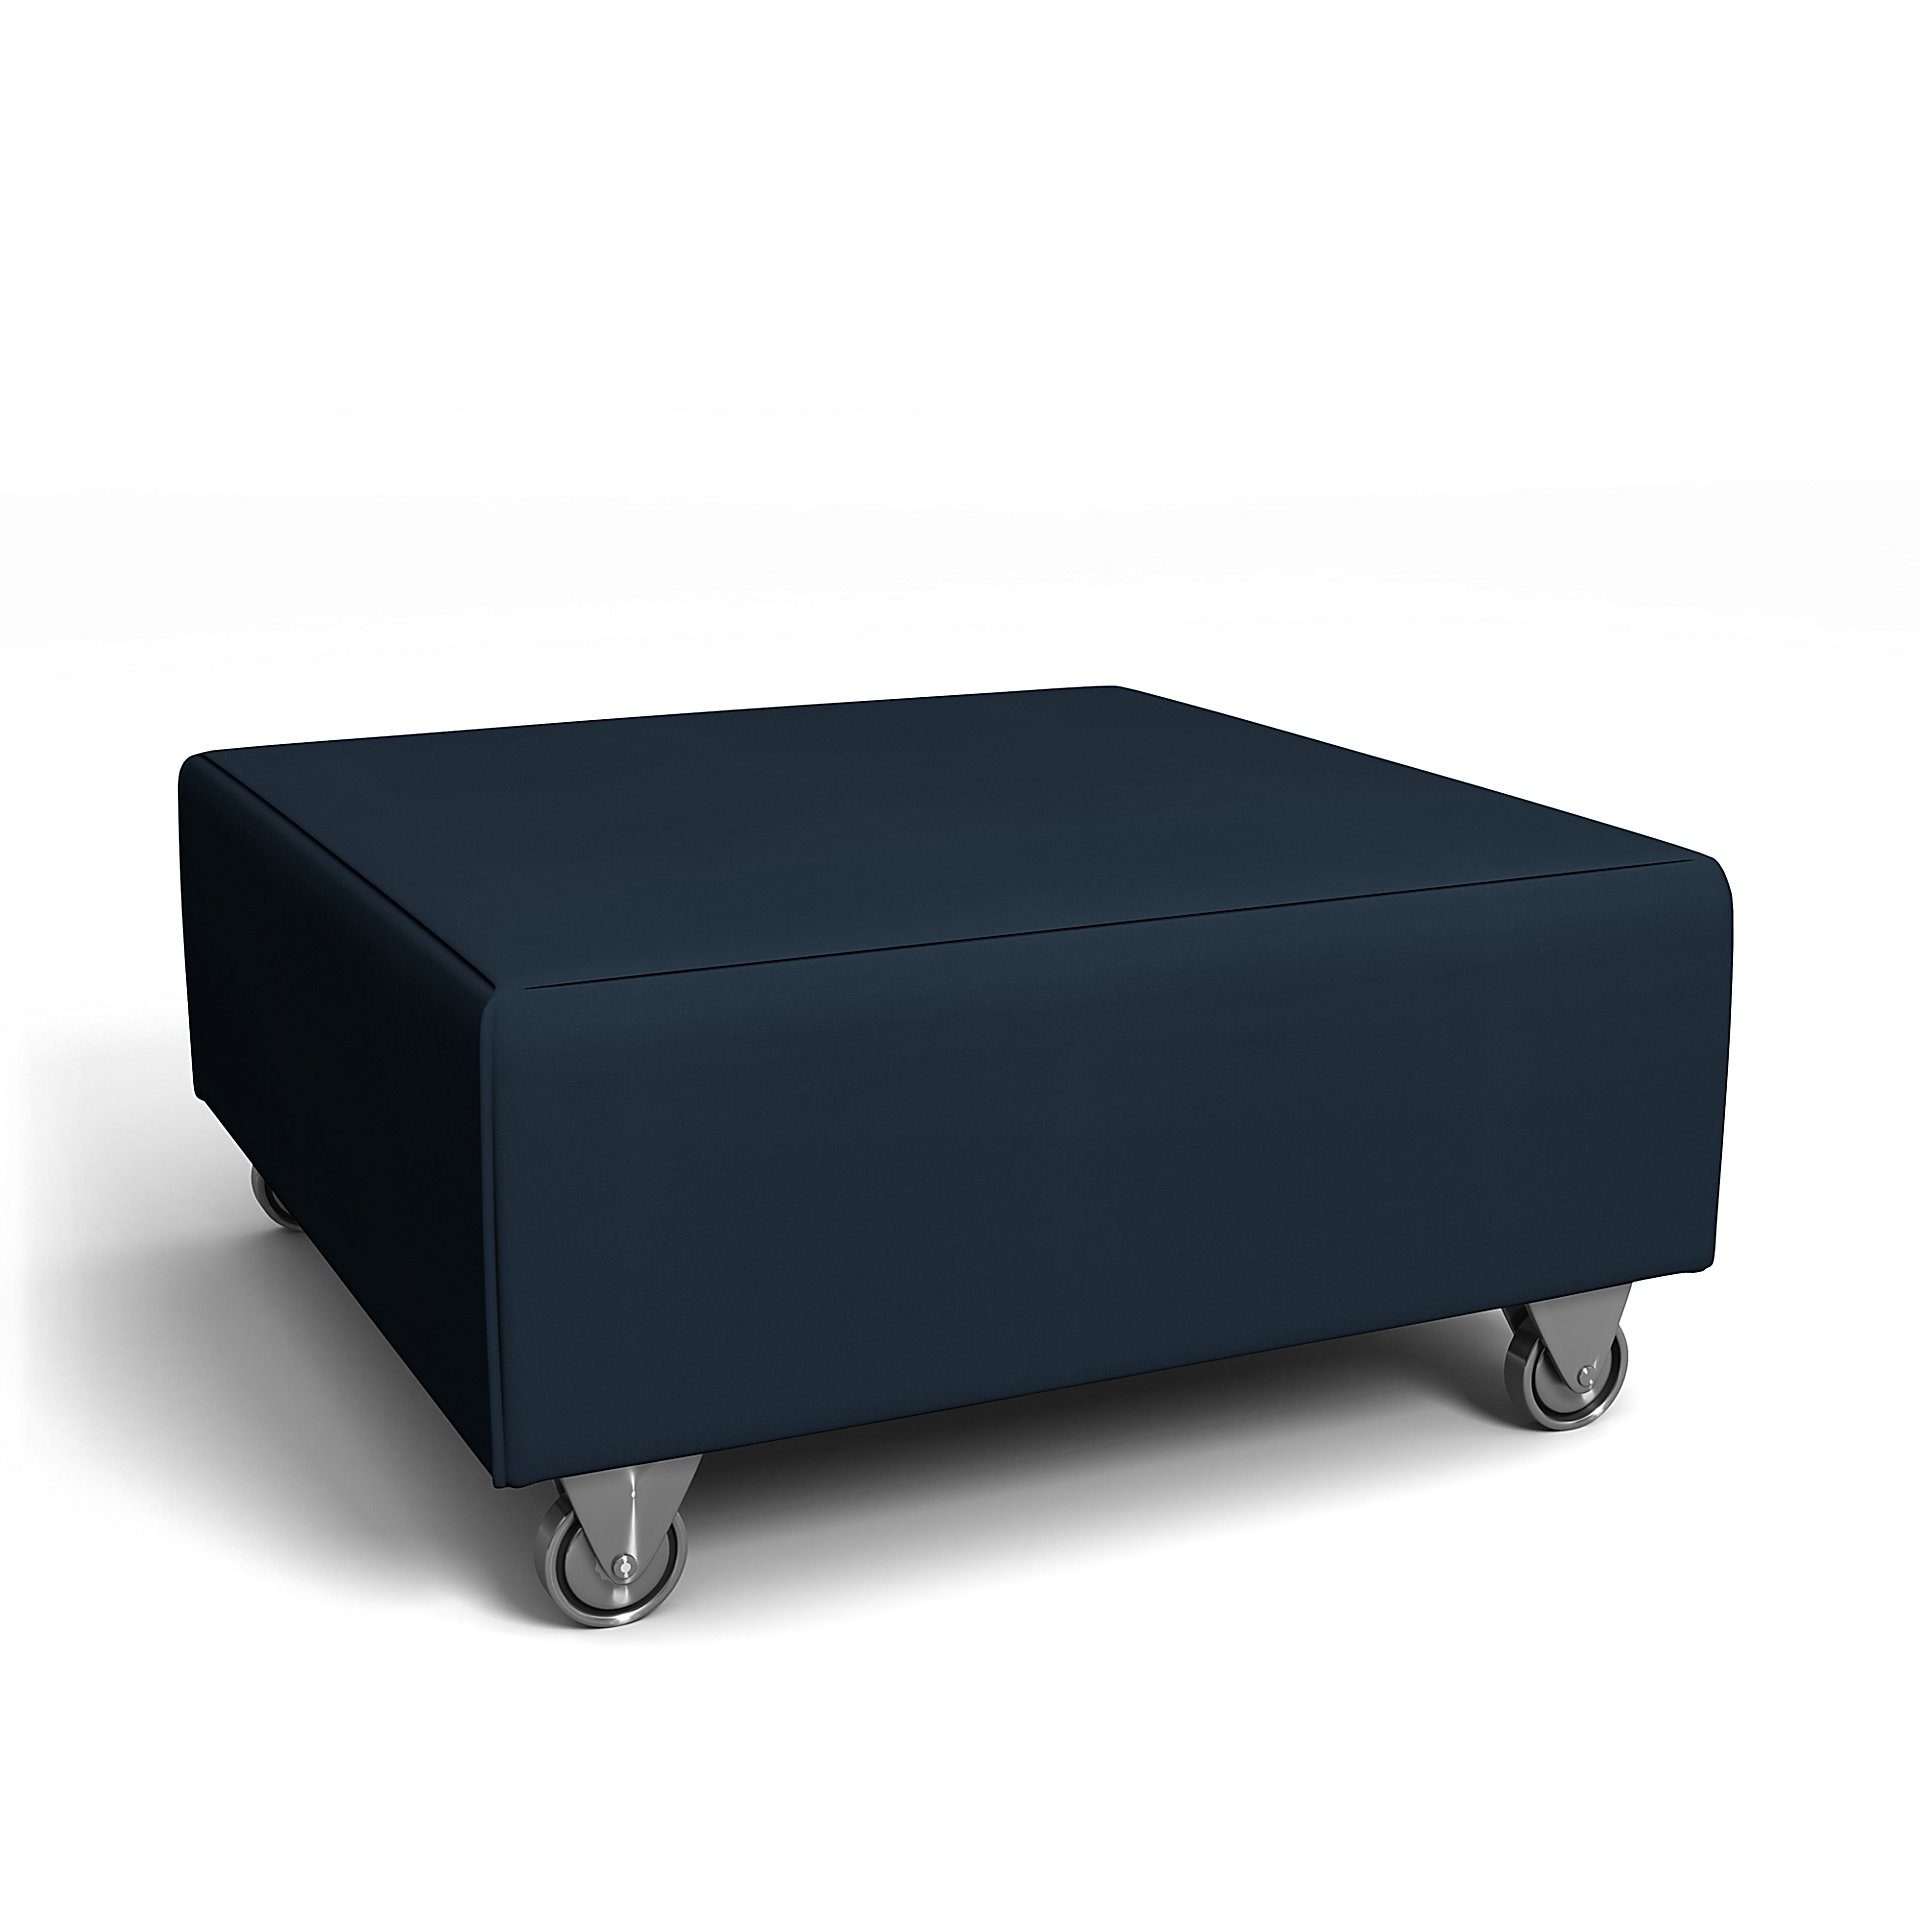 IKEA - Falsterbo Footstool Cover, Navy Blue, Cotton - Bemz